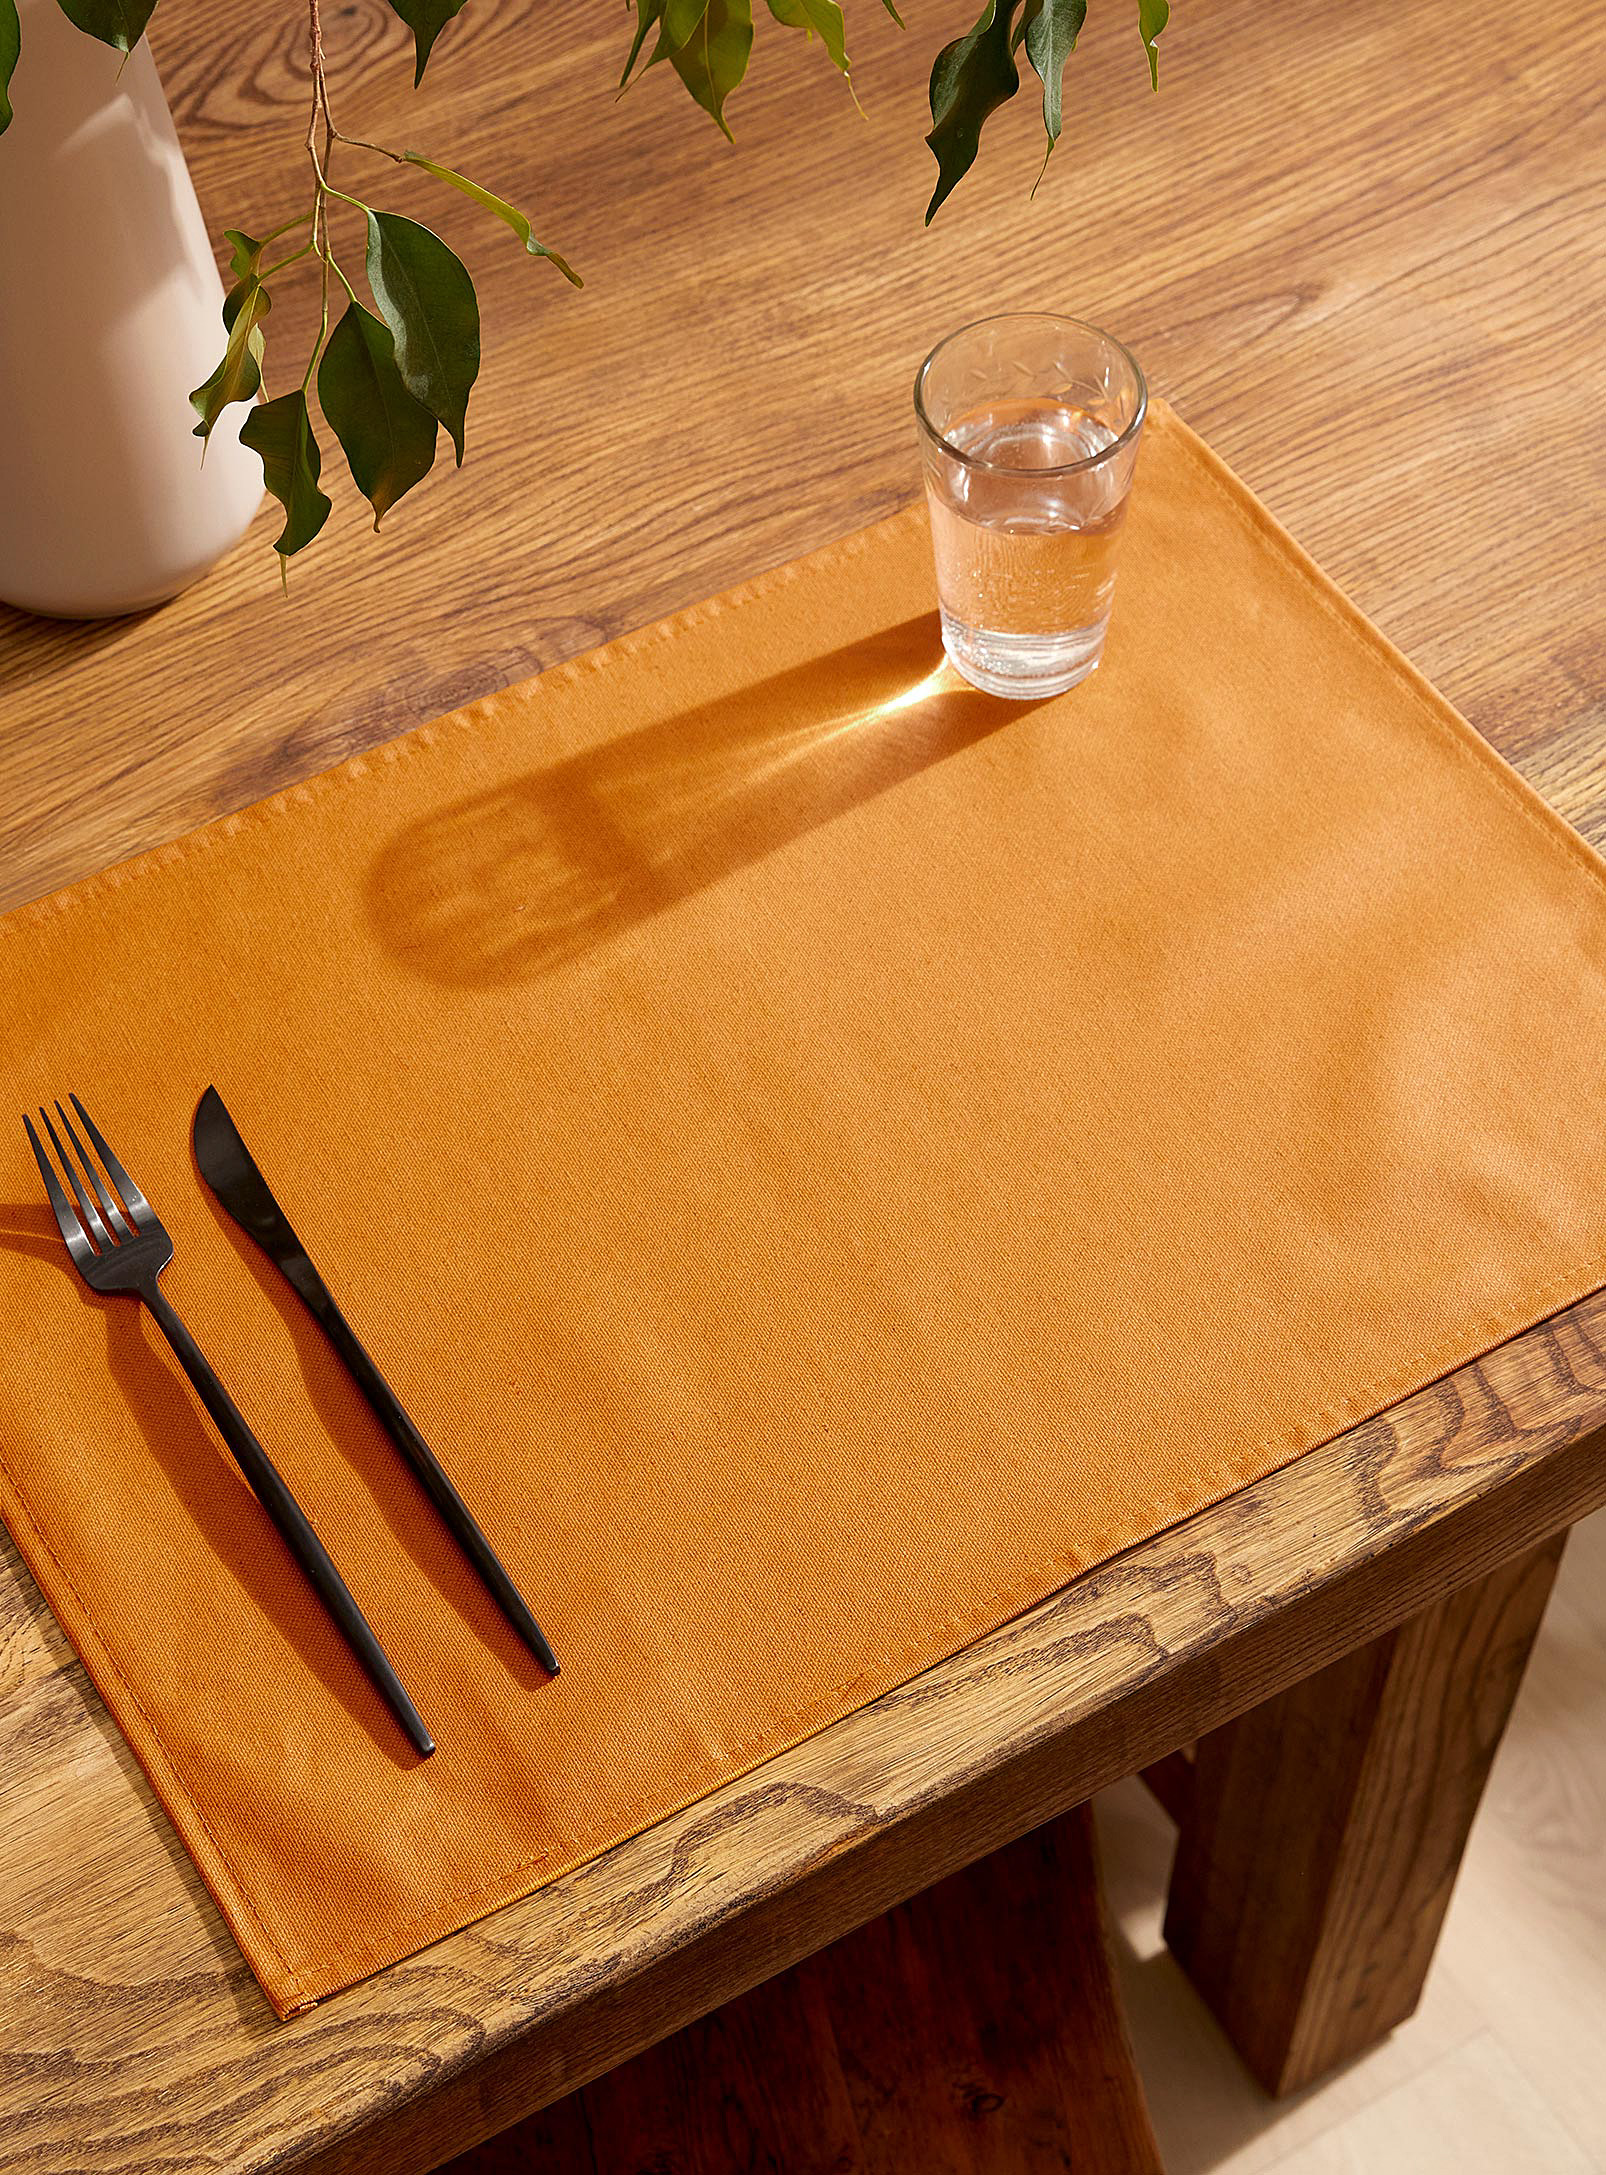 Simons Maison Monochrome Cotton And Linen Coated Placemat In Multi